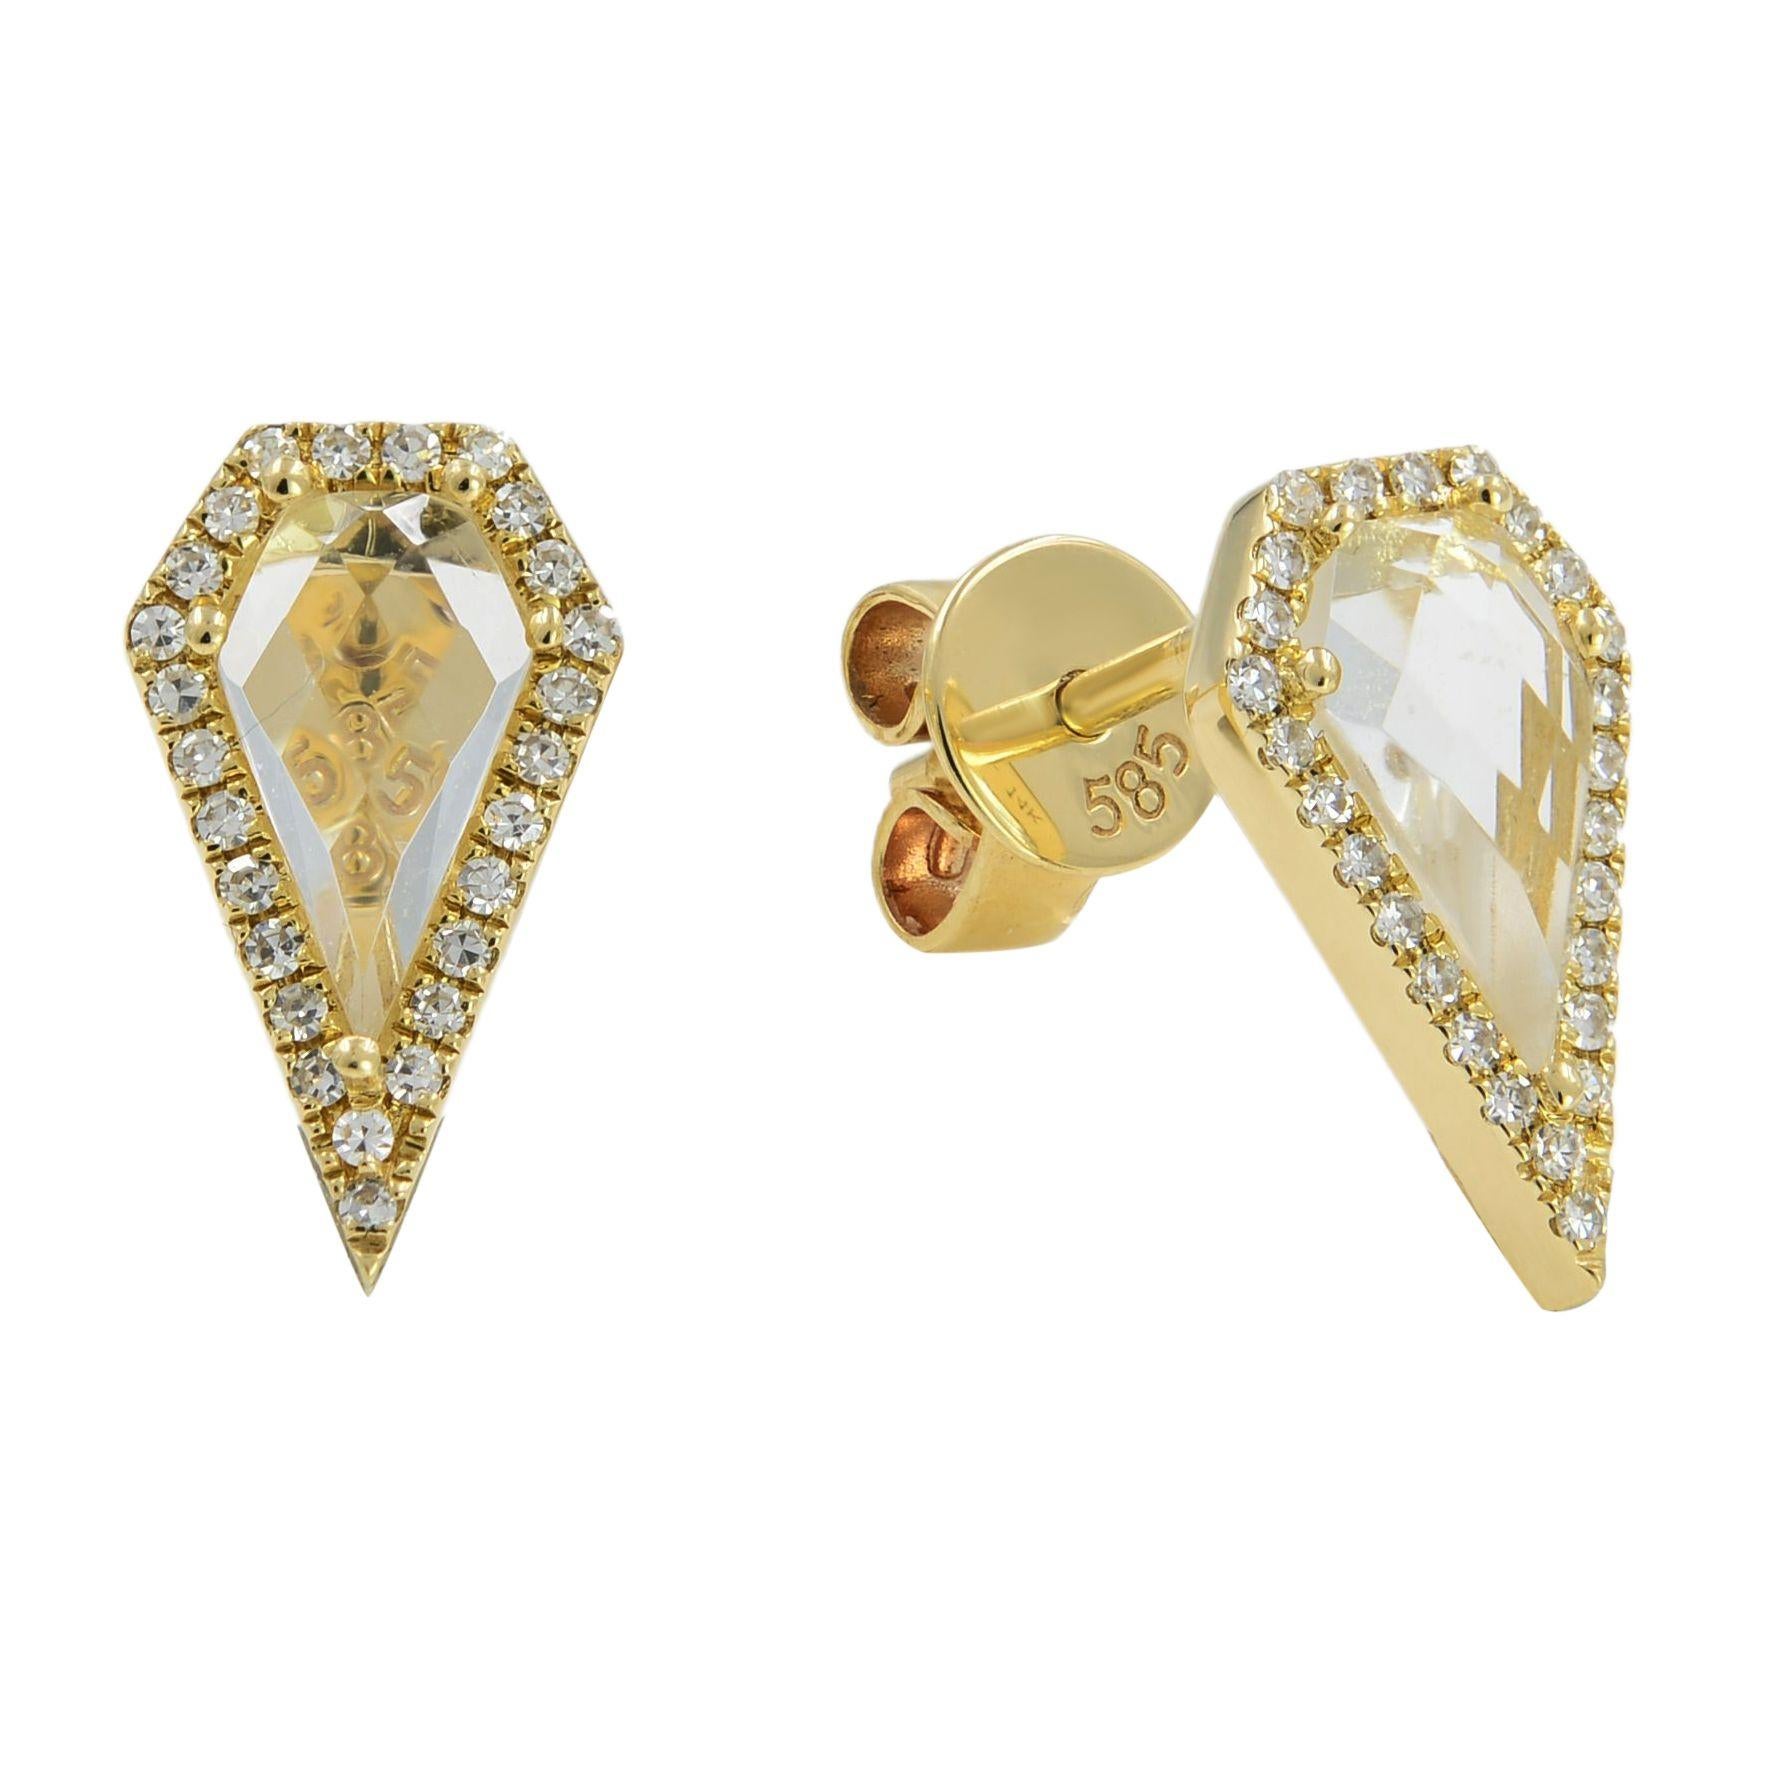 Pave Diamond 0.12cttw and White Topaz 1.20cttw Earrings 14K Yellow Gold For Sale 1